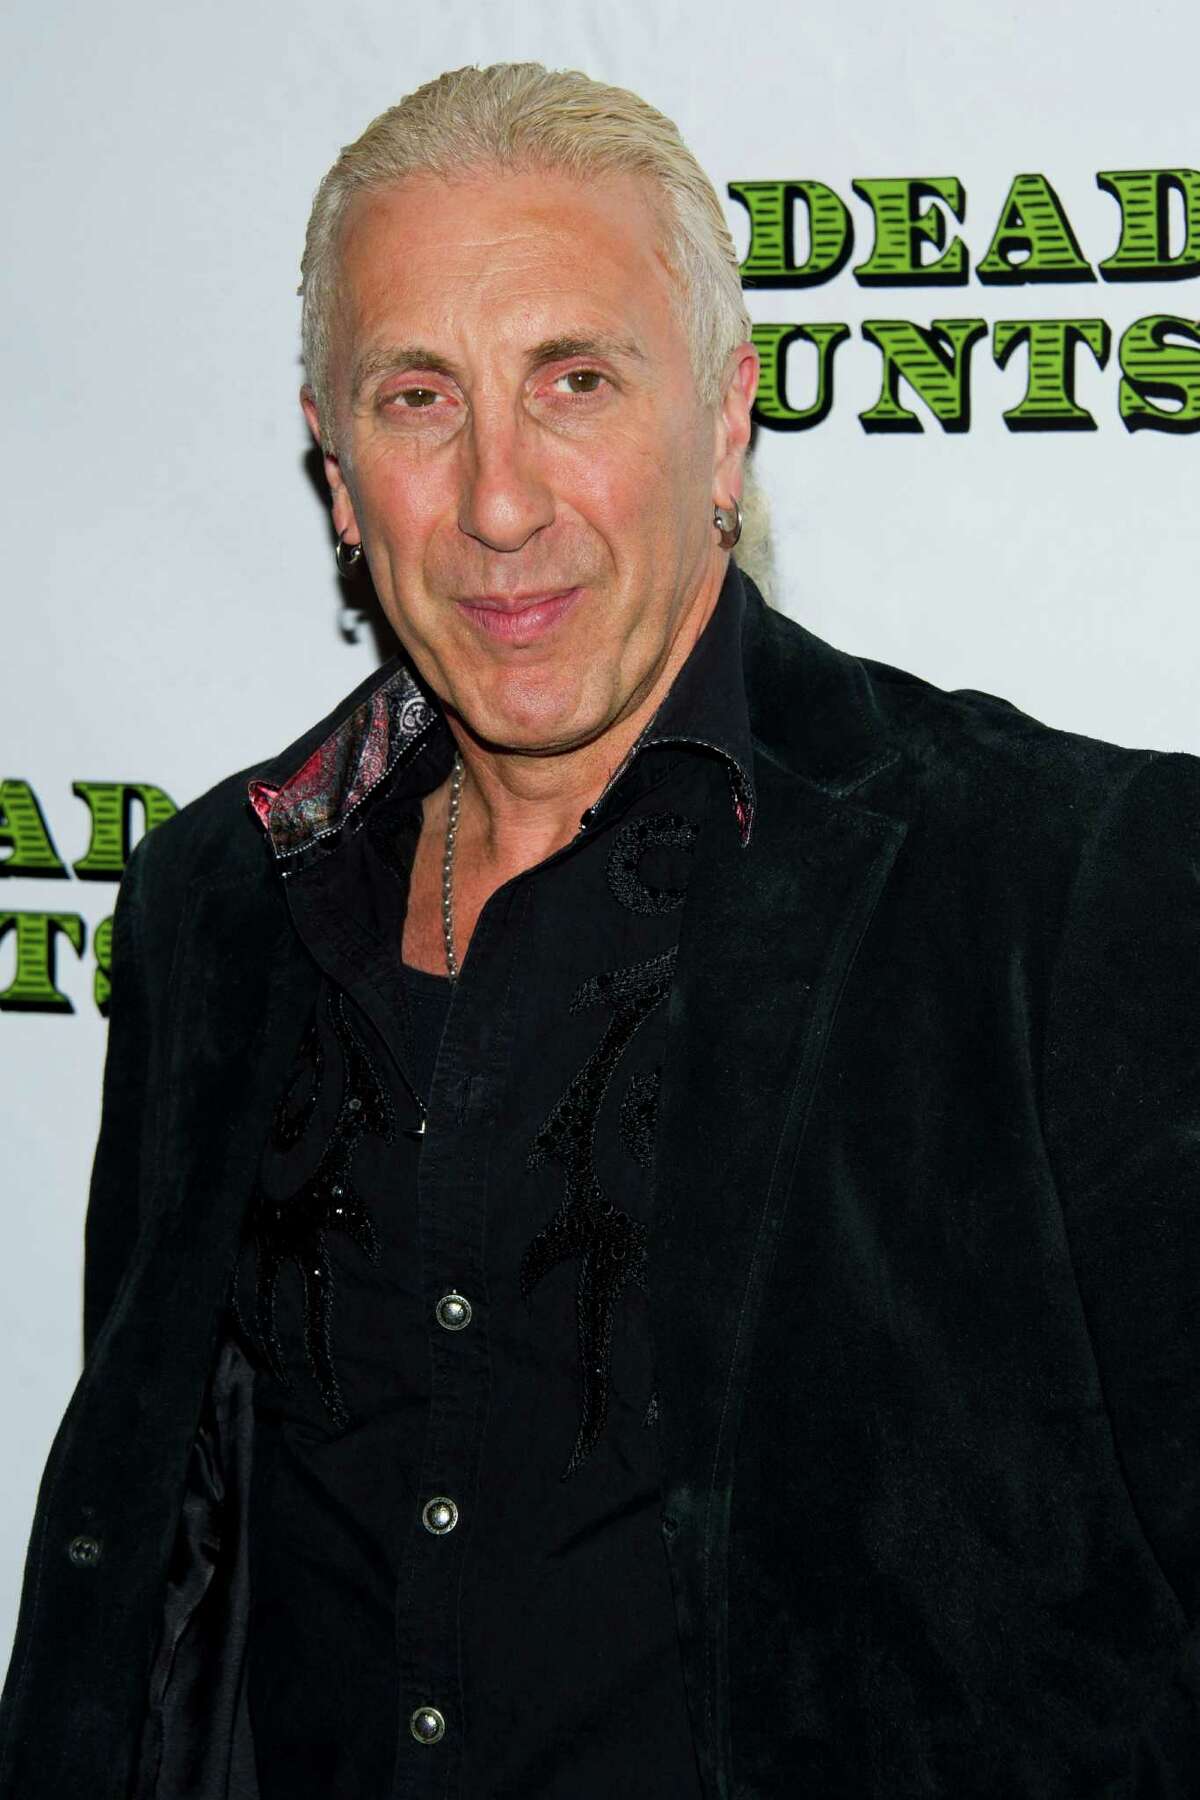 FILE - In this Nov. 12, 2012 file photo, Dee Snider arrives at the opening night performance of the Broadway play "Dead Accounts," in New York. Snider, lead singer of the '80s heavy metal band Twisted Sister, will be headlining the nightclub 54 Below, taking on such standards as "Mack the Knife" and "Cabaret." (Photo by Charles Sykes/Invision/AP, File)